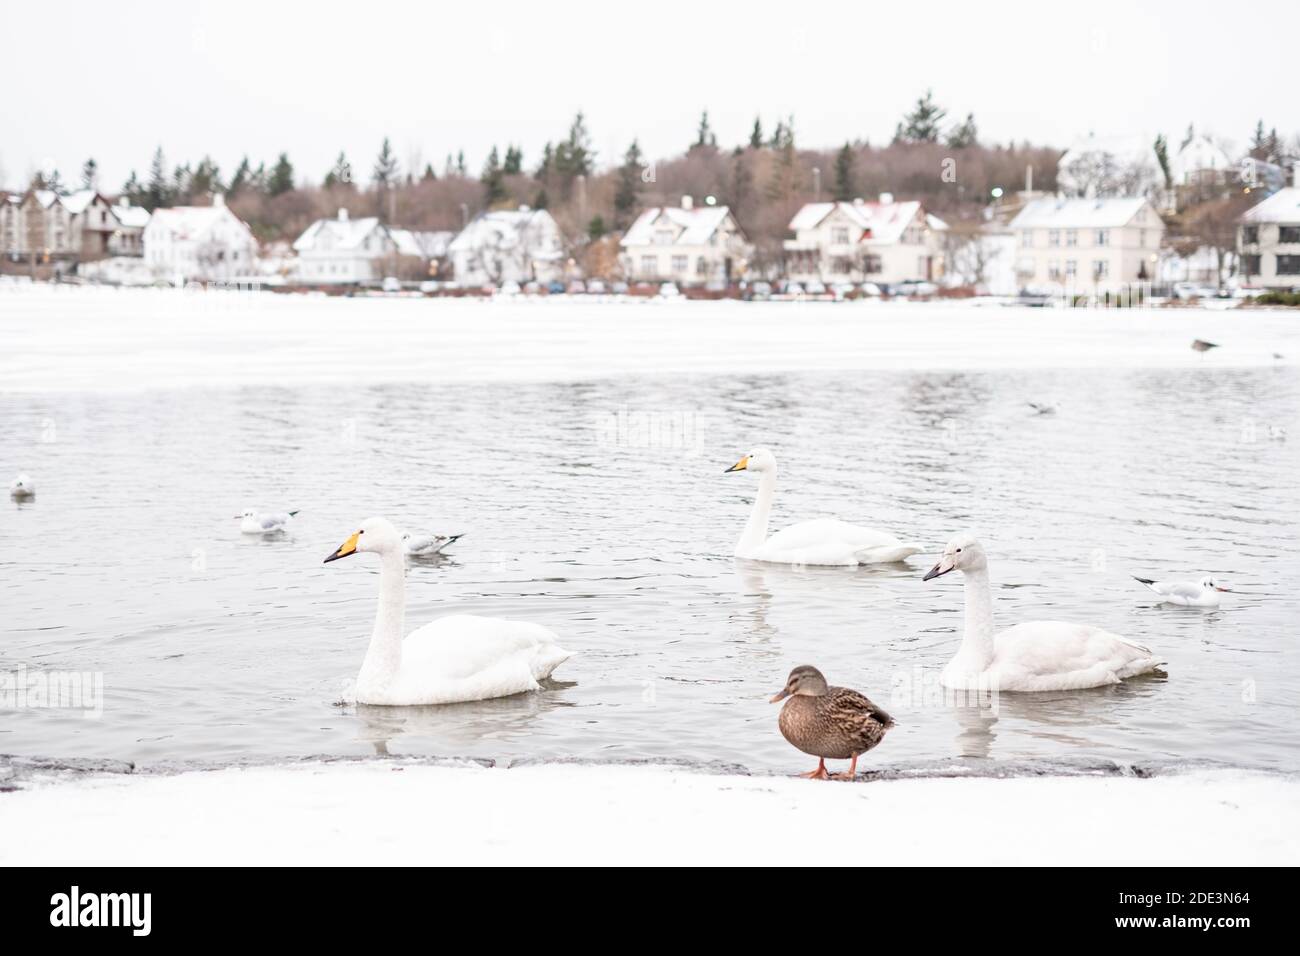 Swans and birds swimming in Lake Tjörnin, in downtown Reykjavik Iceland on a snowy winter day, with houses in the background. Stock Photo